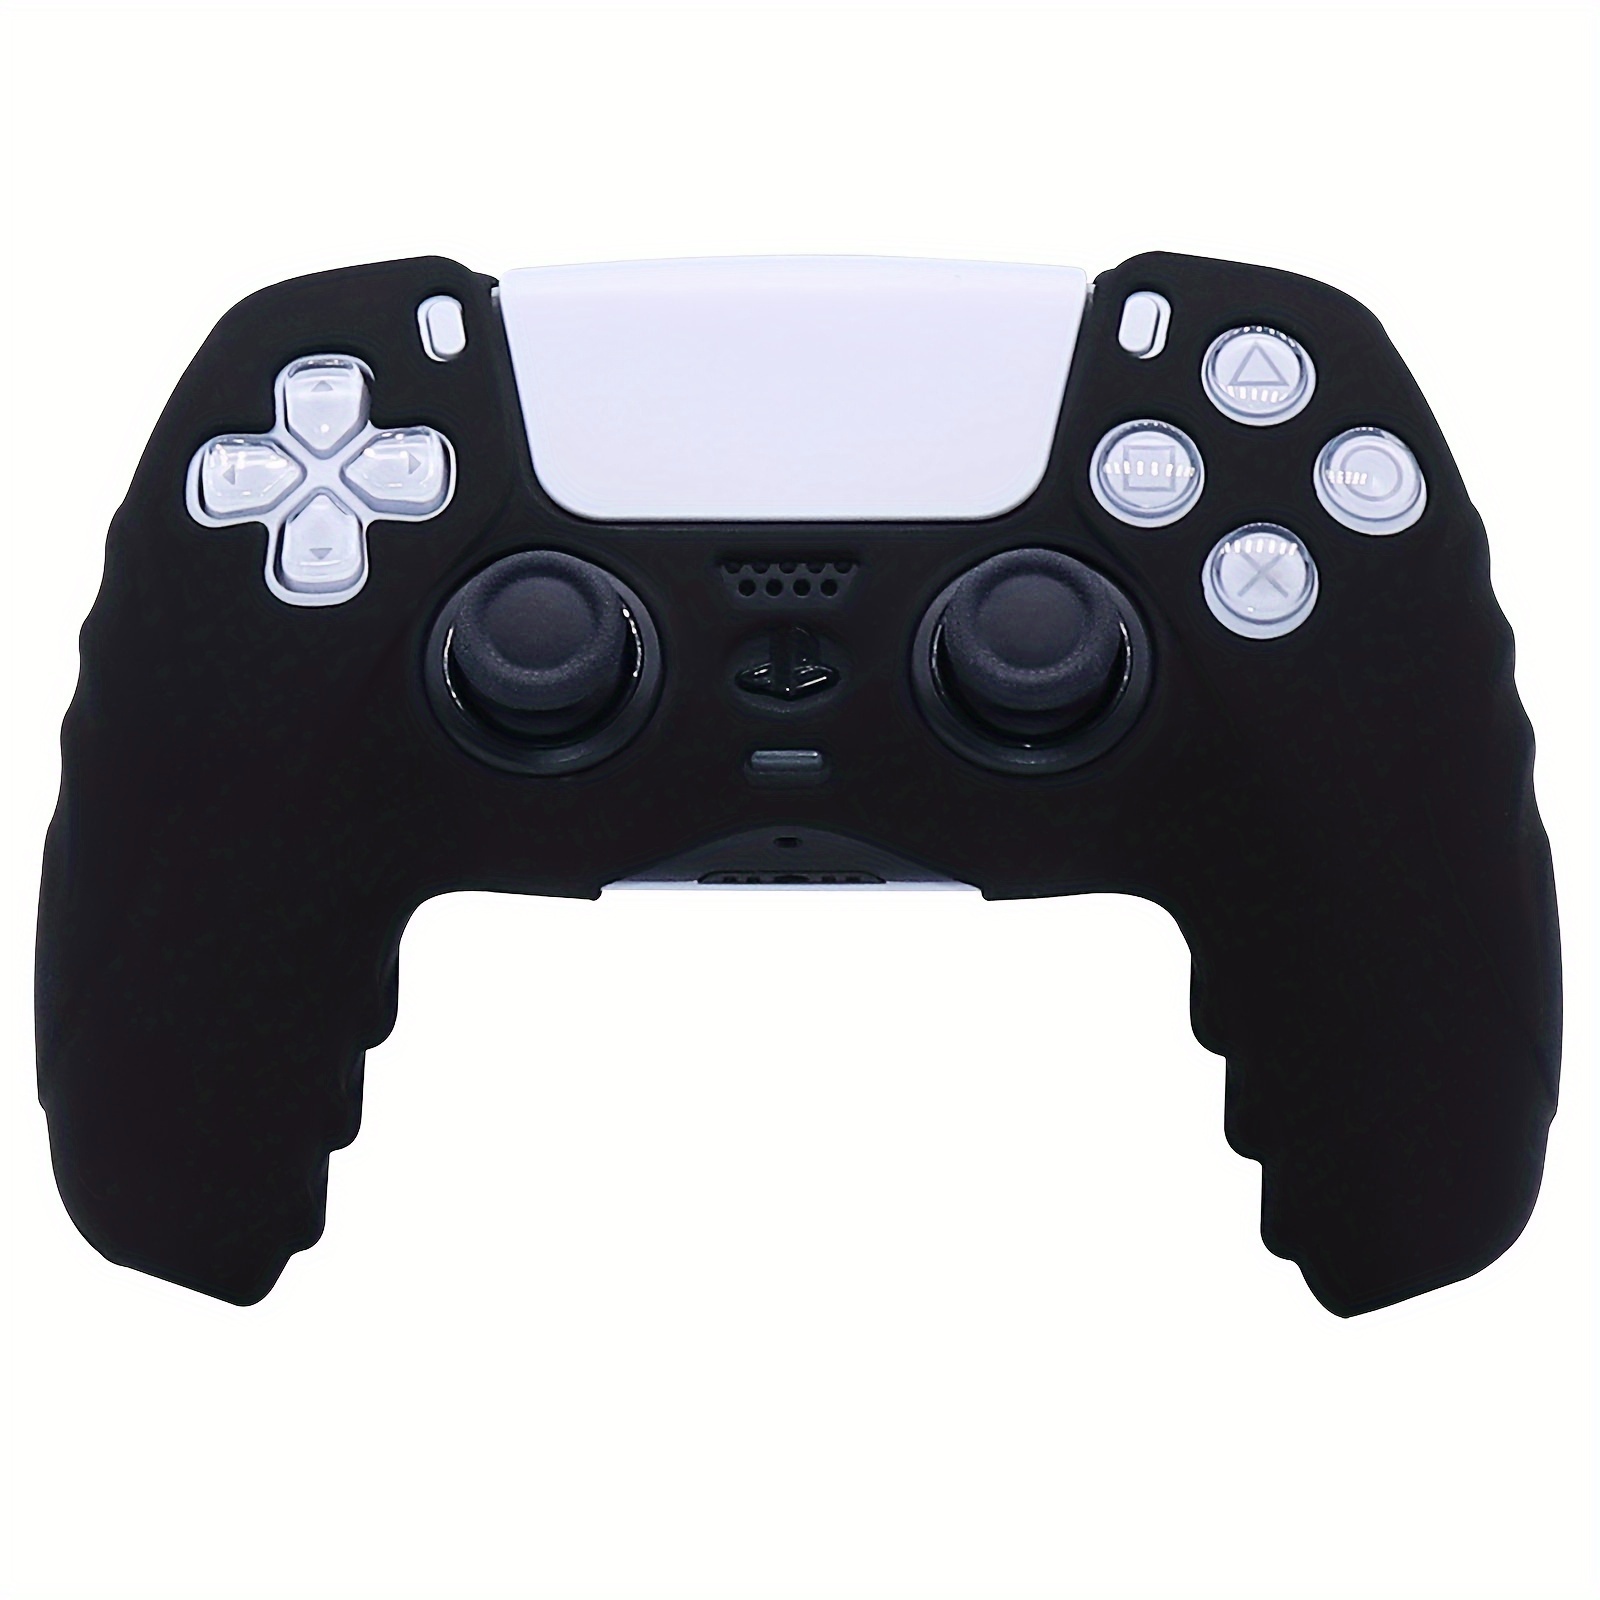 

Soft Silicon Protective Case Cover For Ps5 Controller Skin Cases For Playstation 5 Gamepad Control Accessories